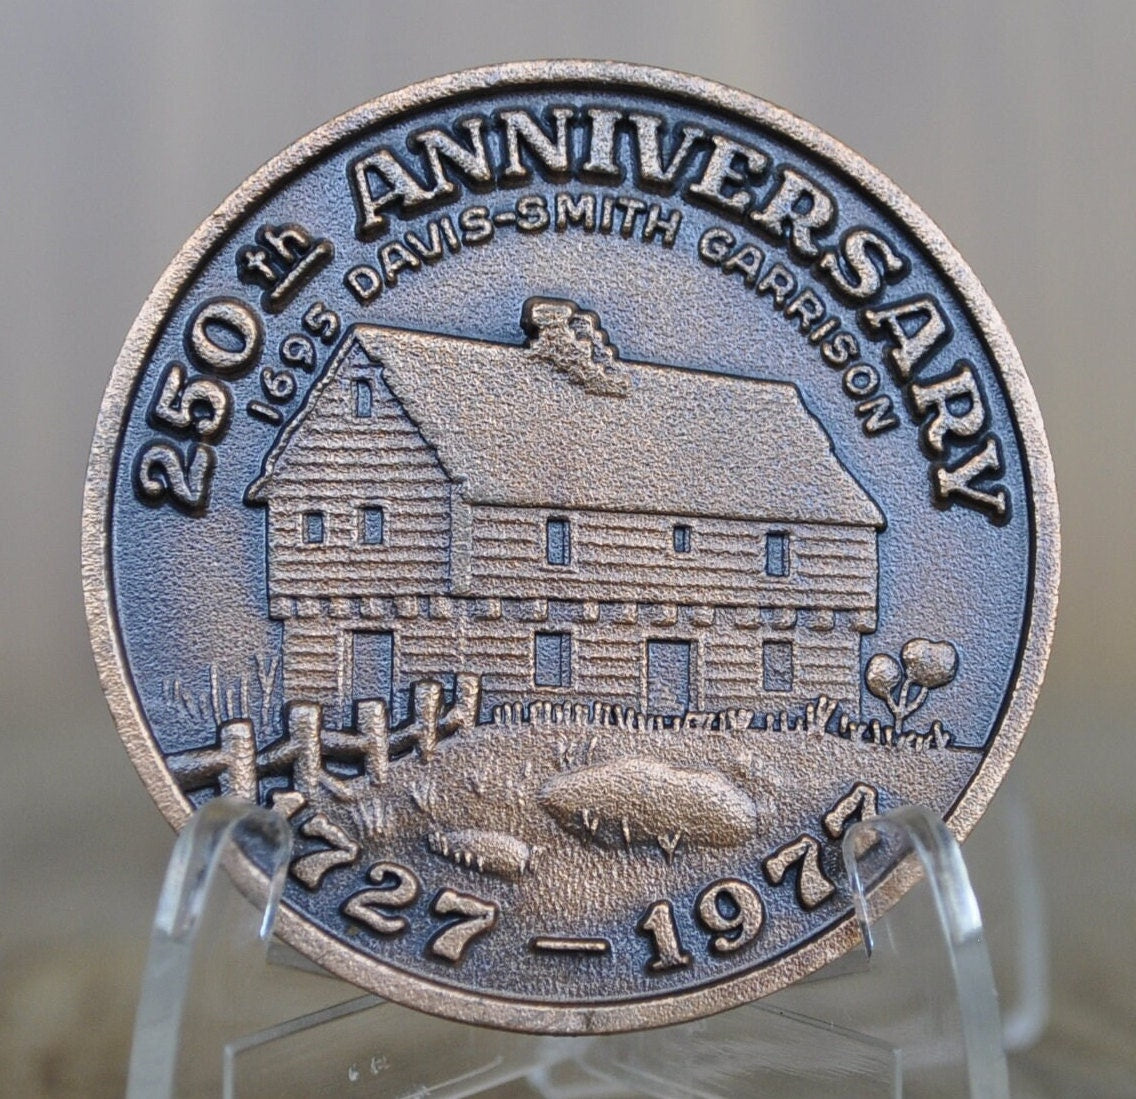 Newmarket NH 350th Anniversary Medal - Silver, Pewter, Bronze, Copper, Choose by Metal - 1977 New market New Hampshire Anniversary Token